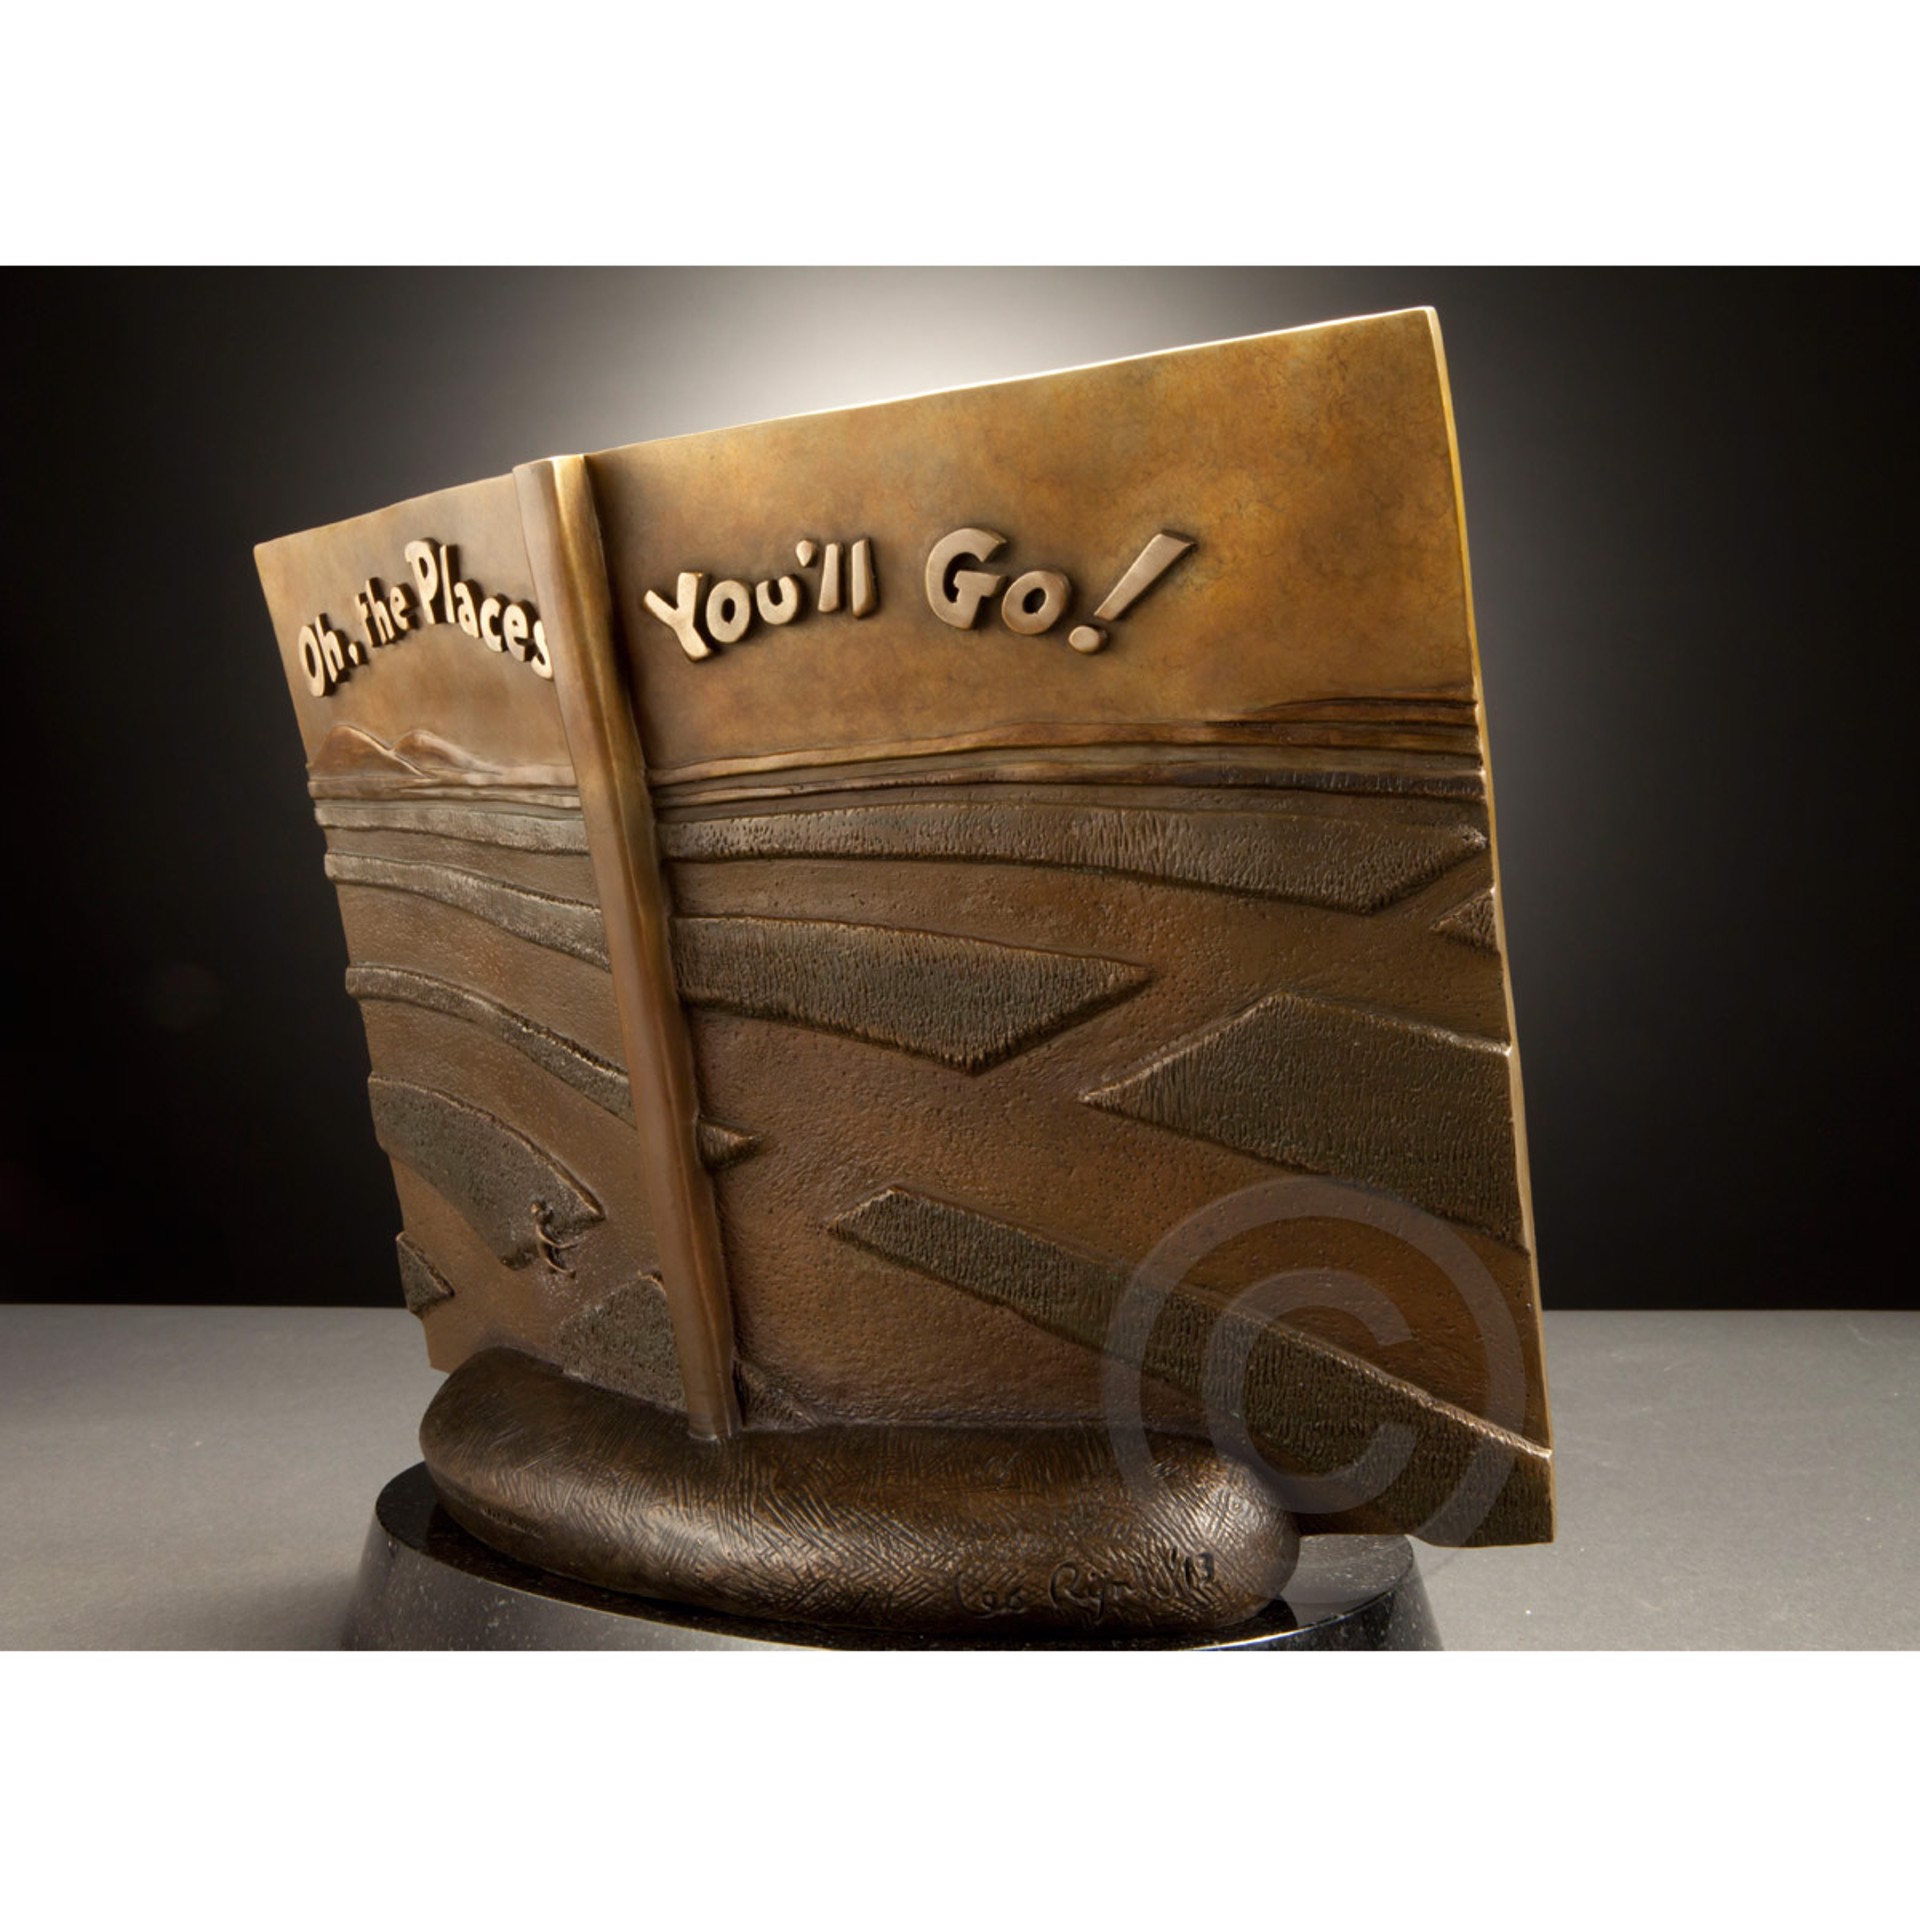 Oh, The Places You'll Go (Maquette) by Dr. Seuss